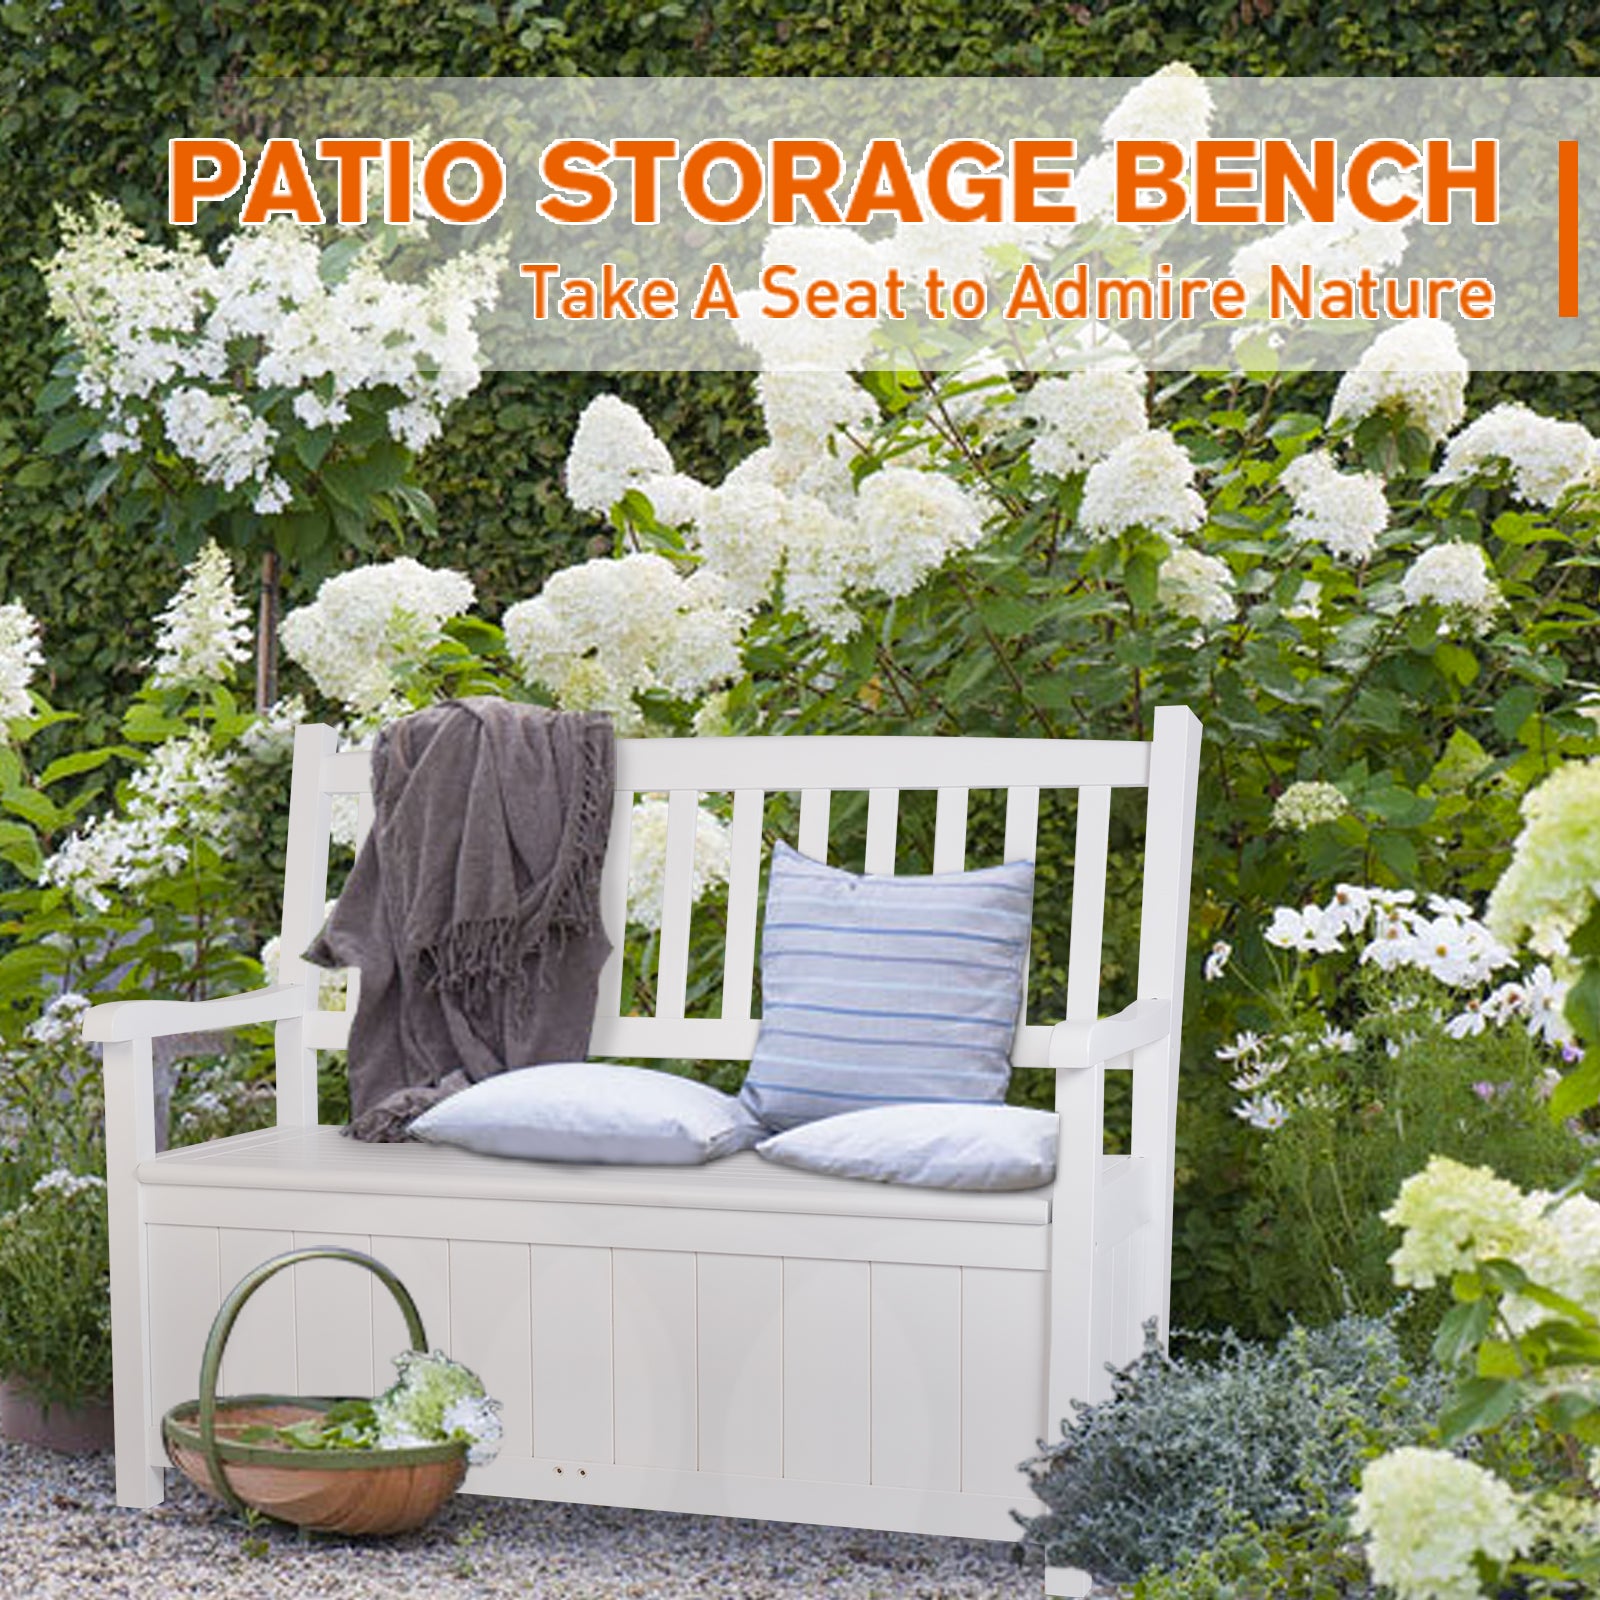 Outdoor Storage Bench Wooden Deck Box Bench Outdoor Seating with Back, White